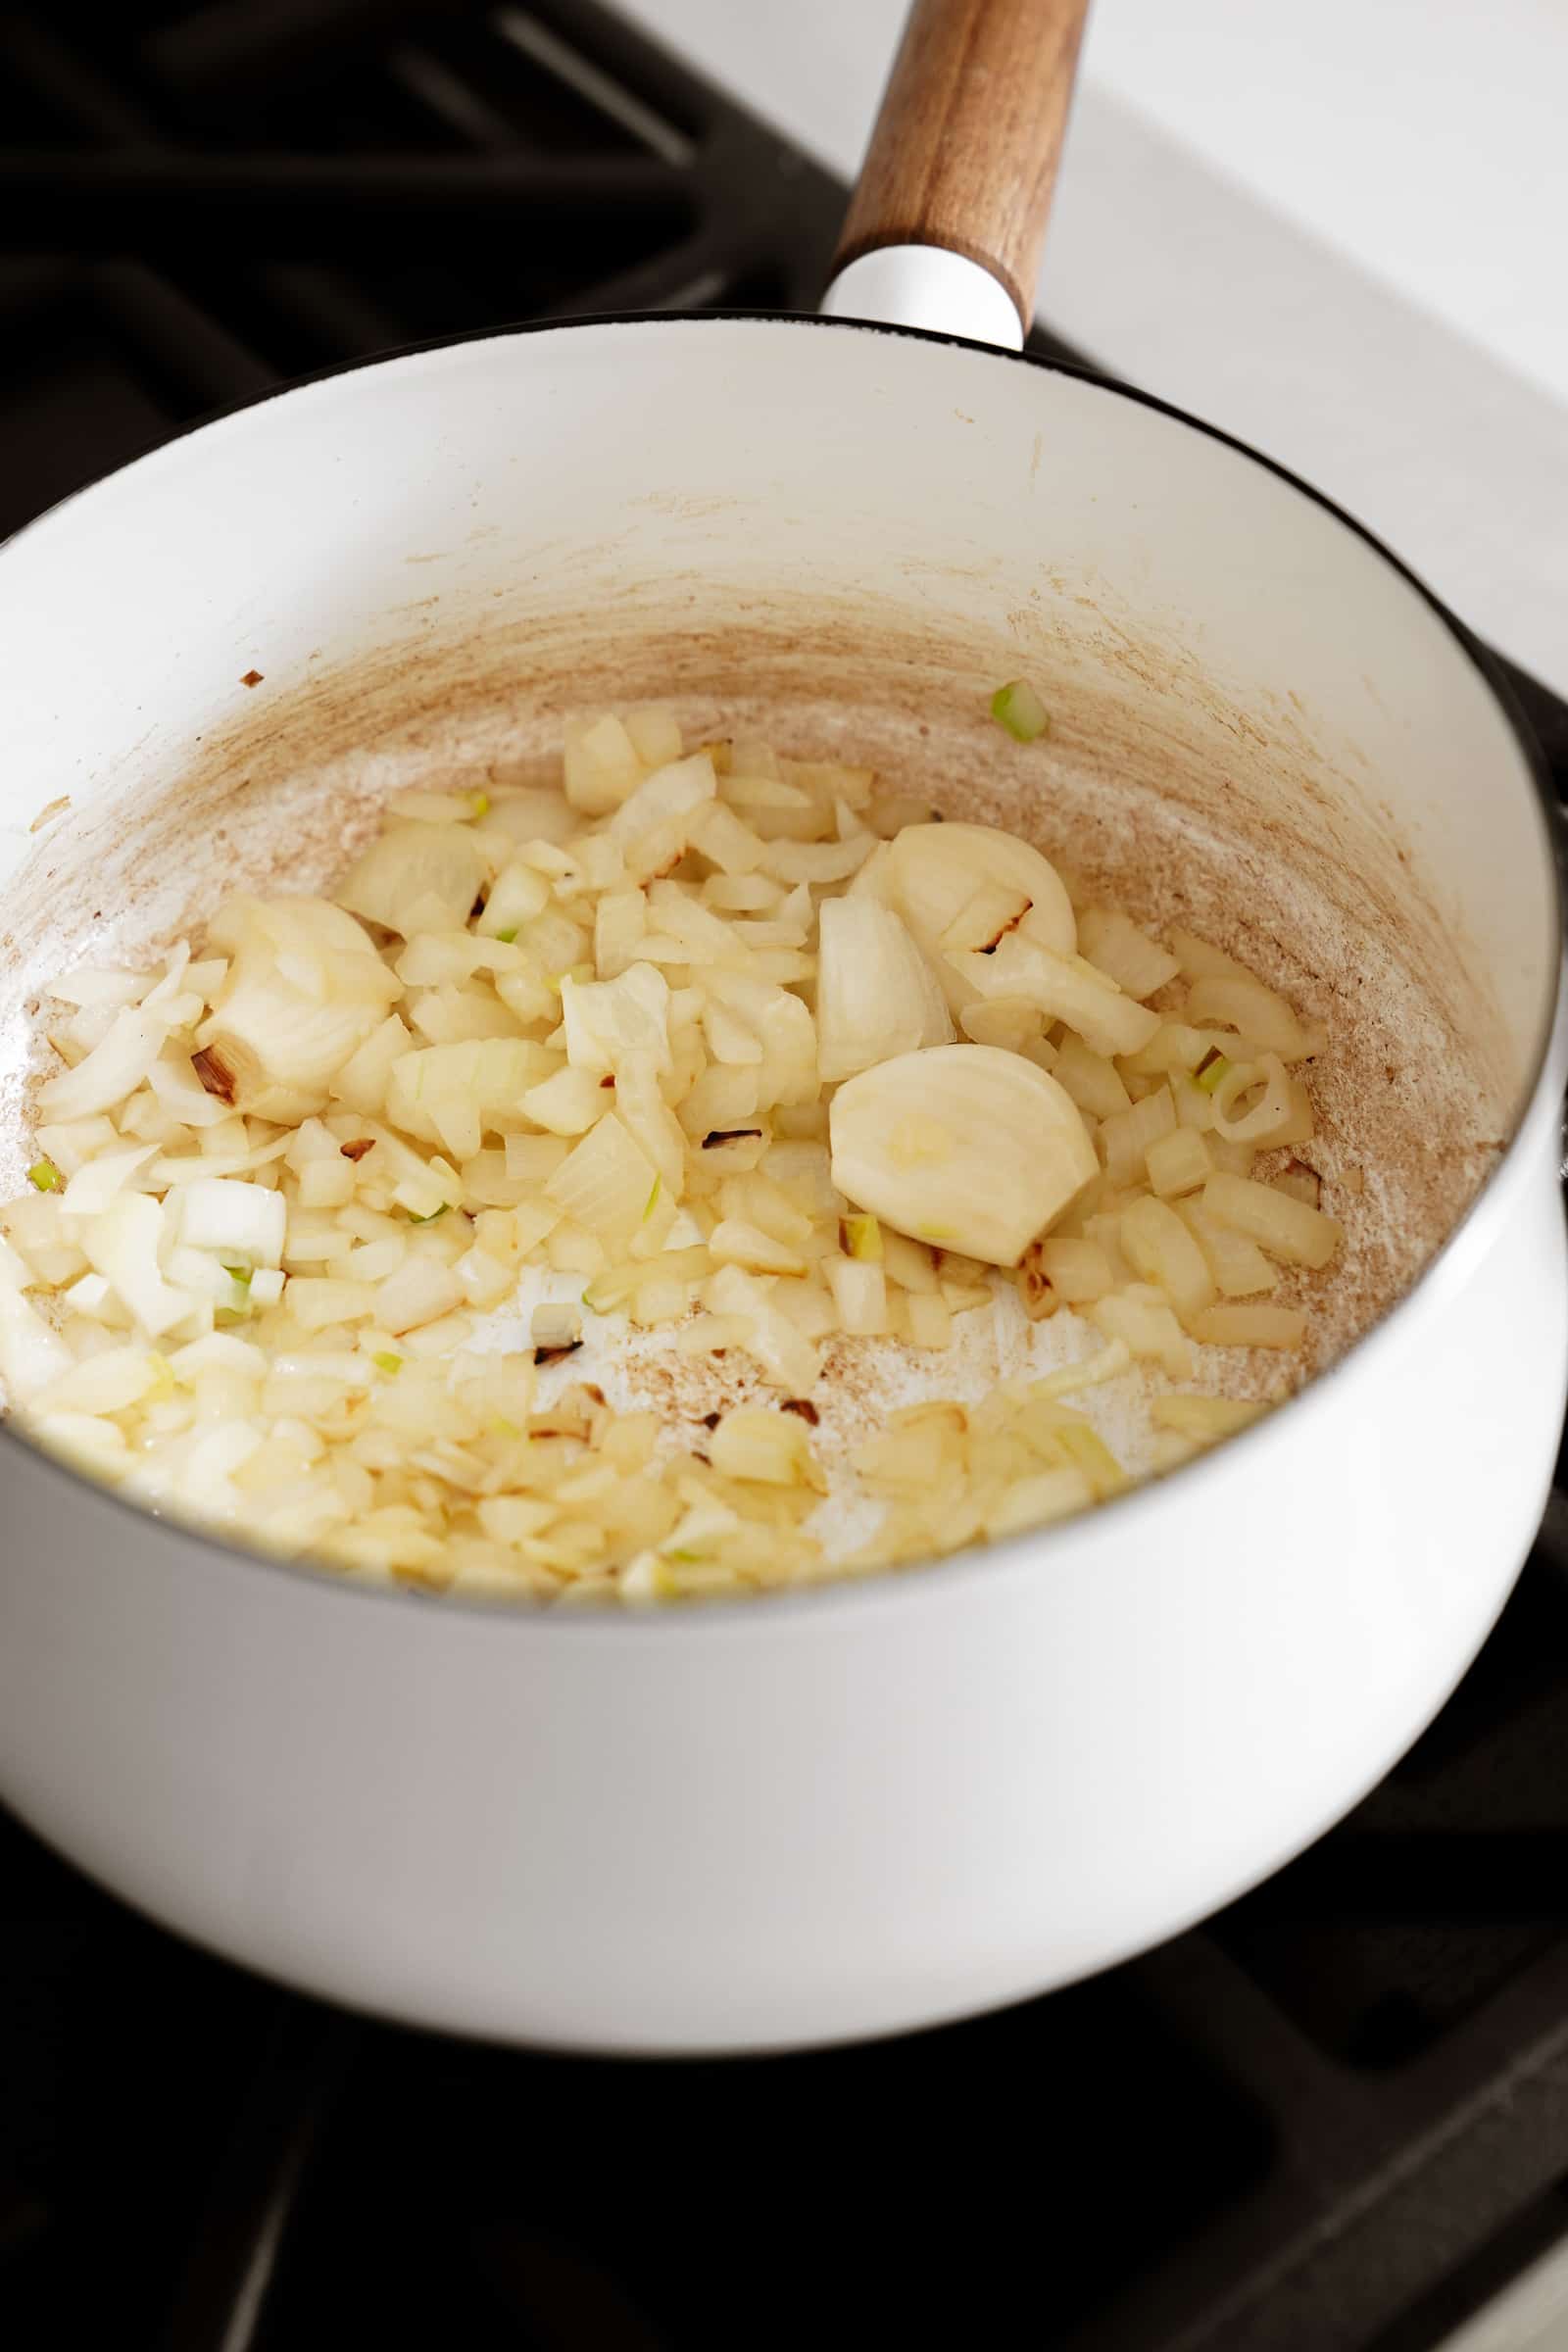 Onion and garlic cooking in a pot on the stove